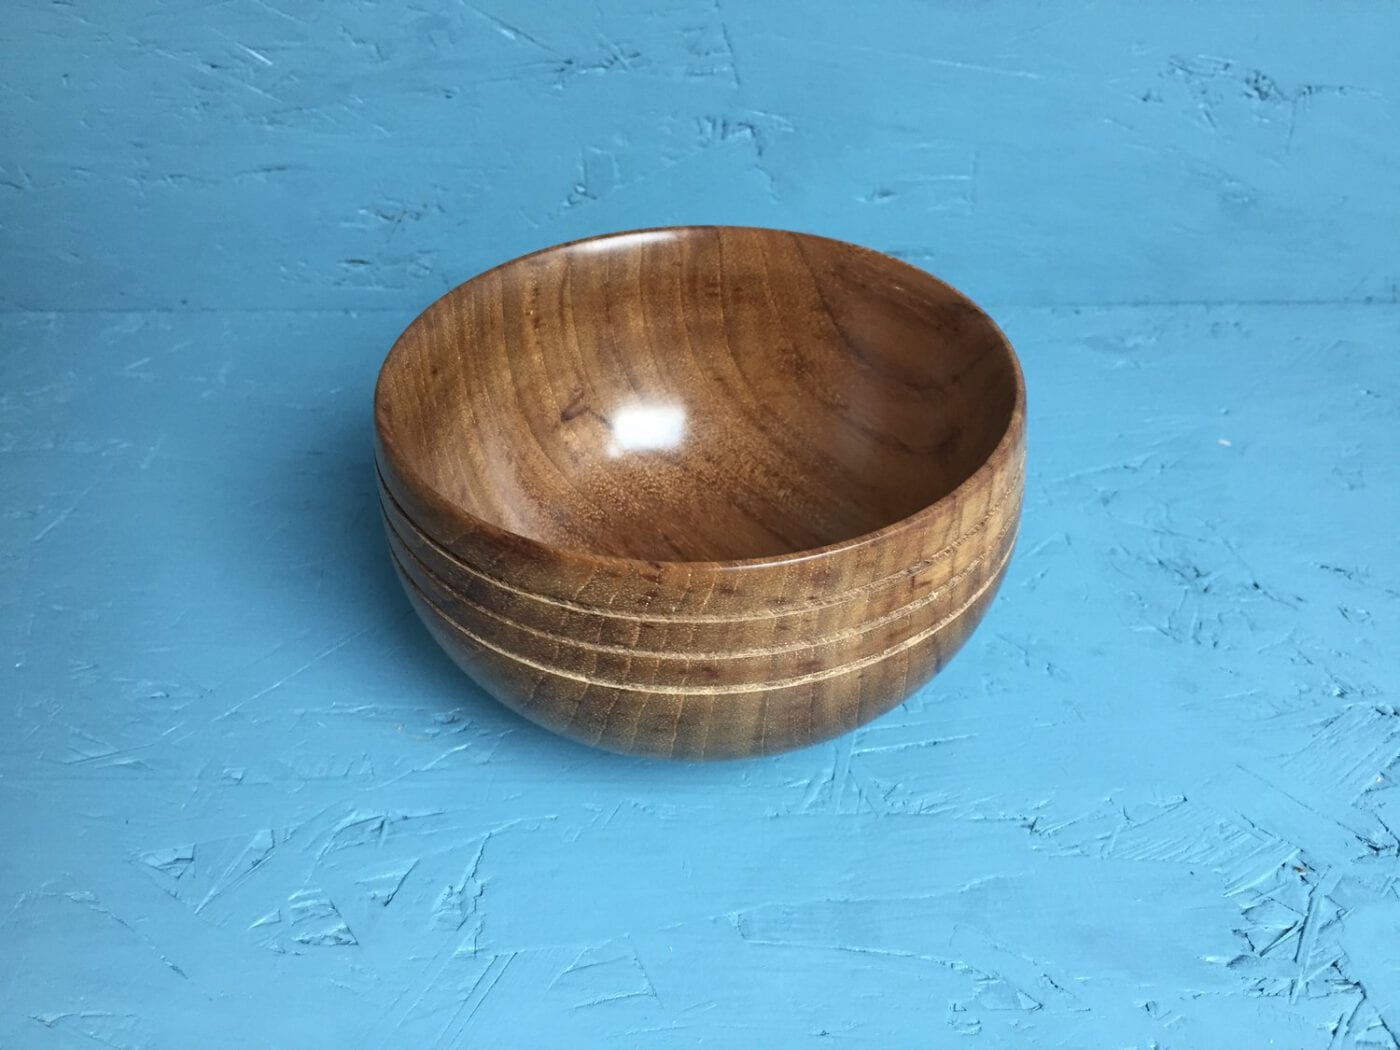 The Urban Turner: Finding passion in woodturning